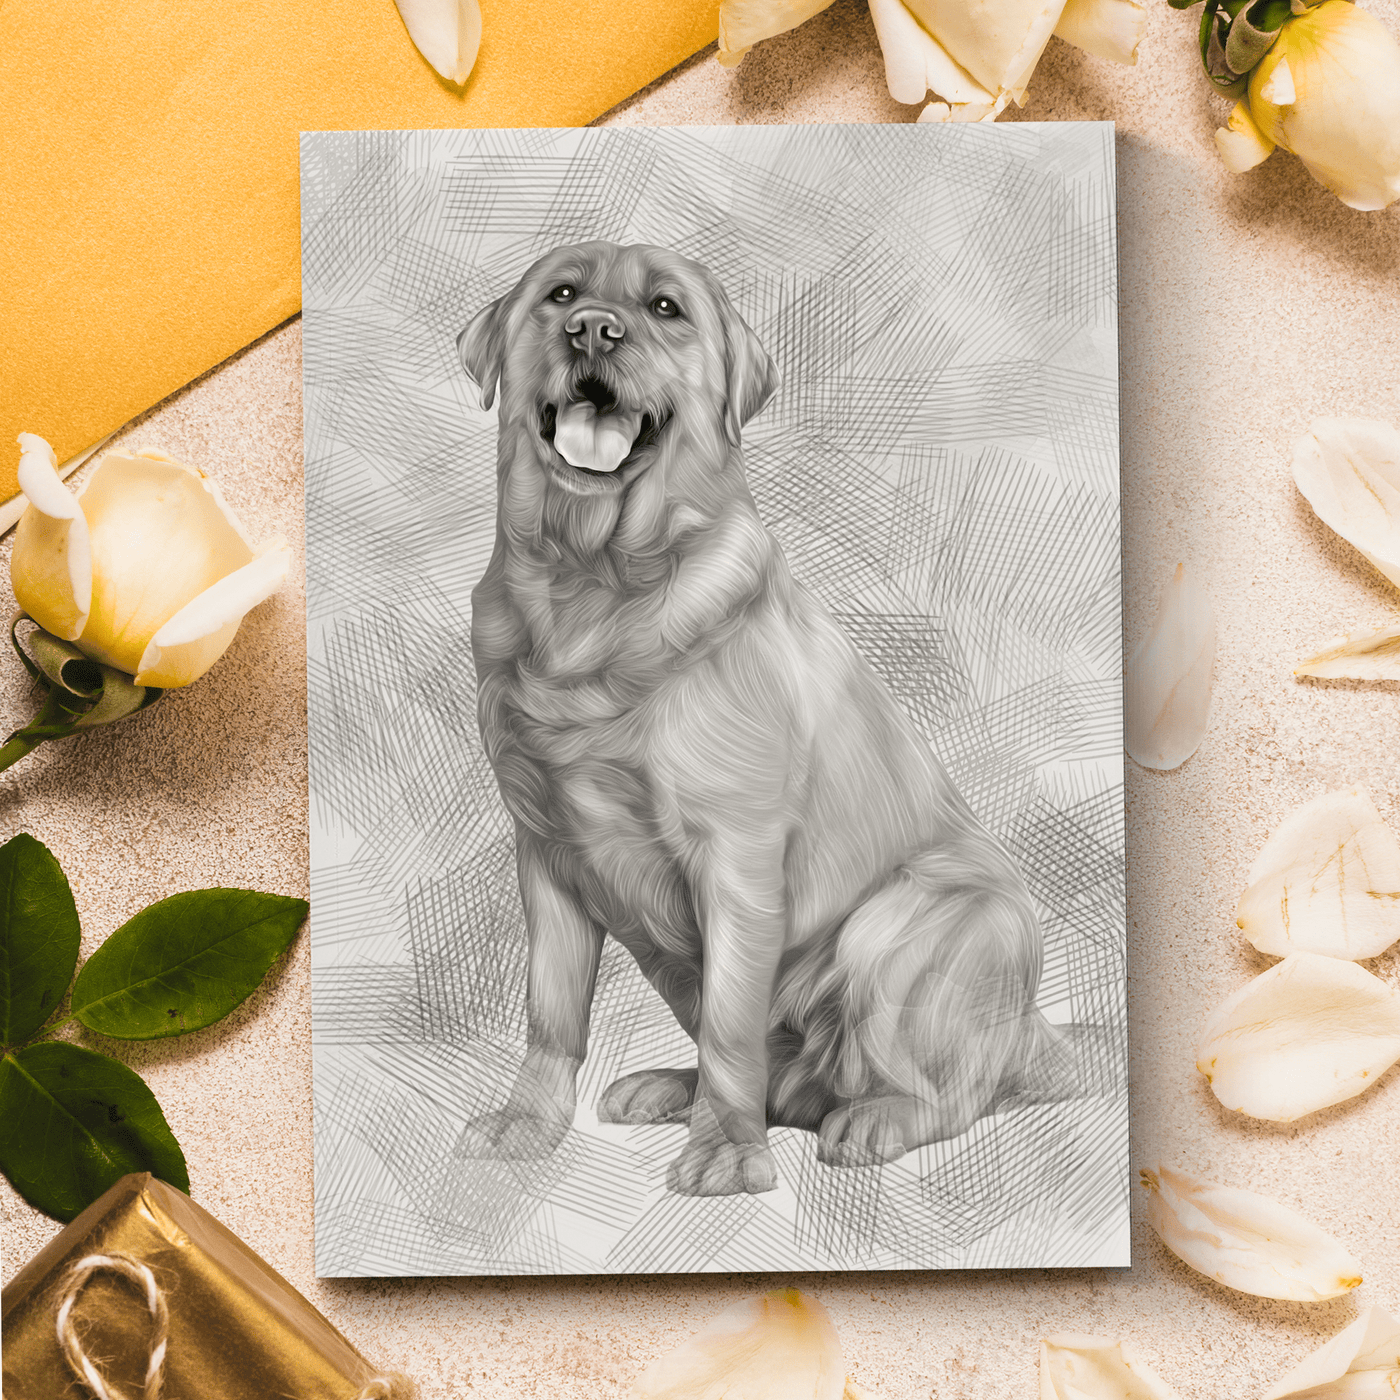 dog graphite drawing of an adorable dog